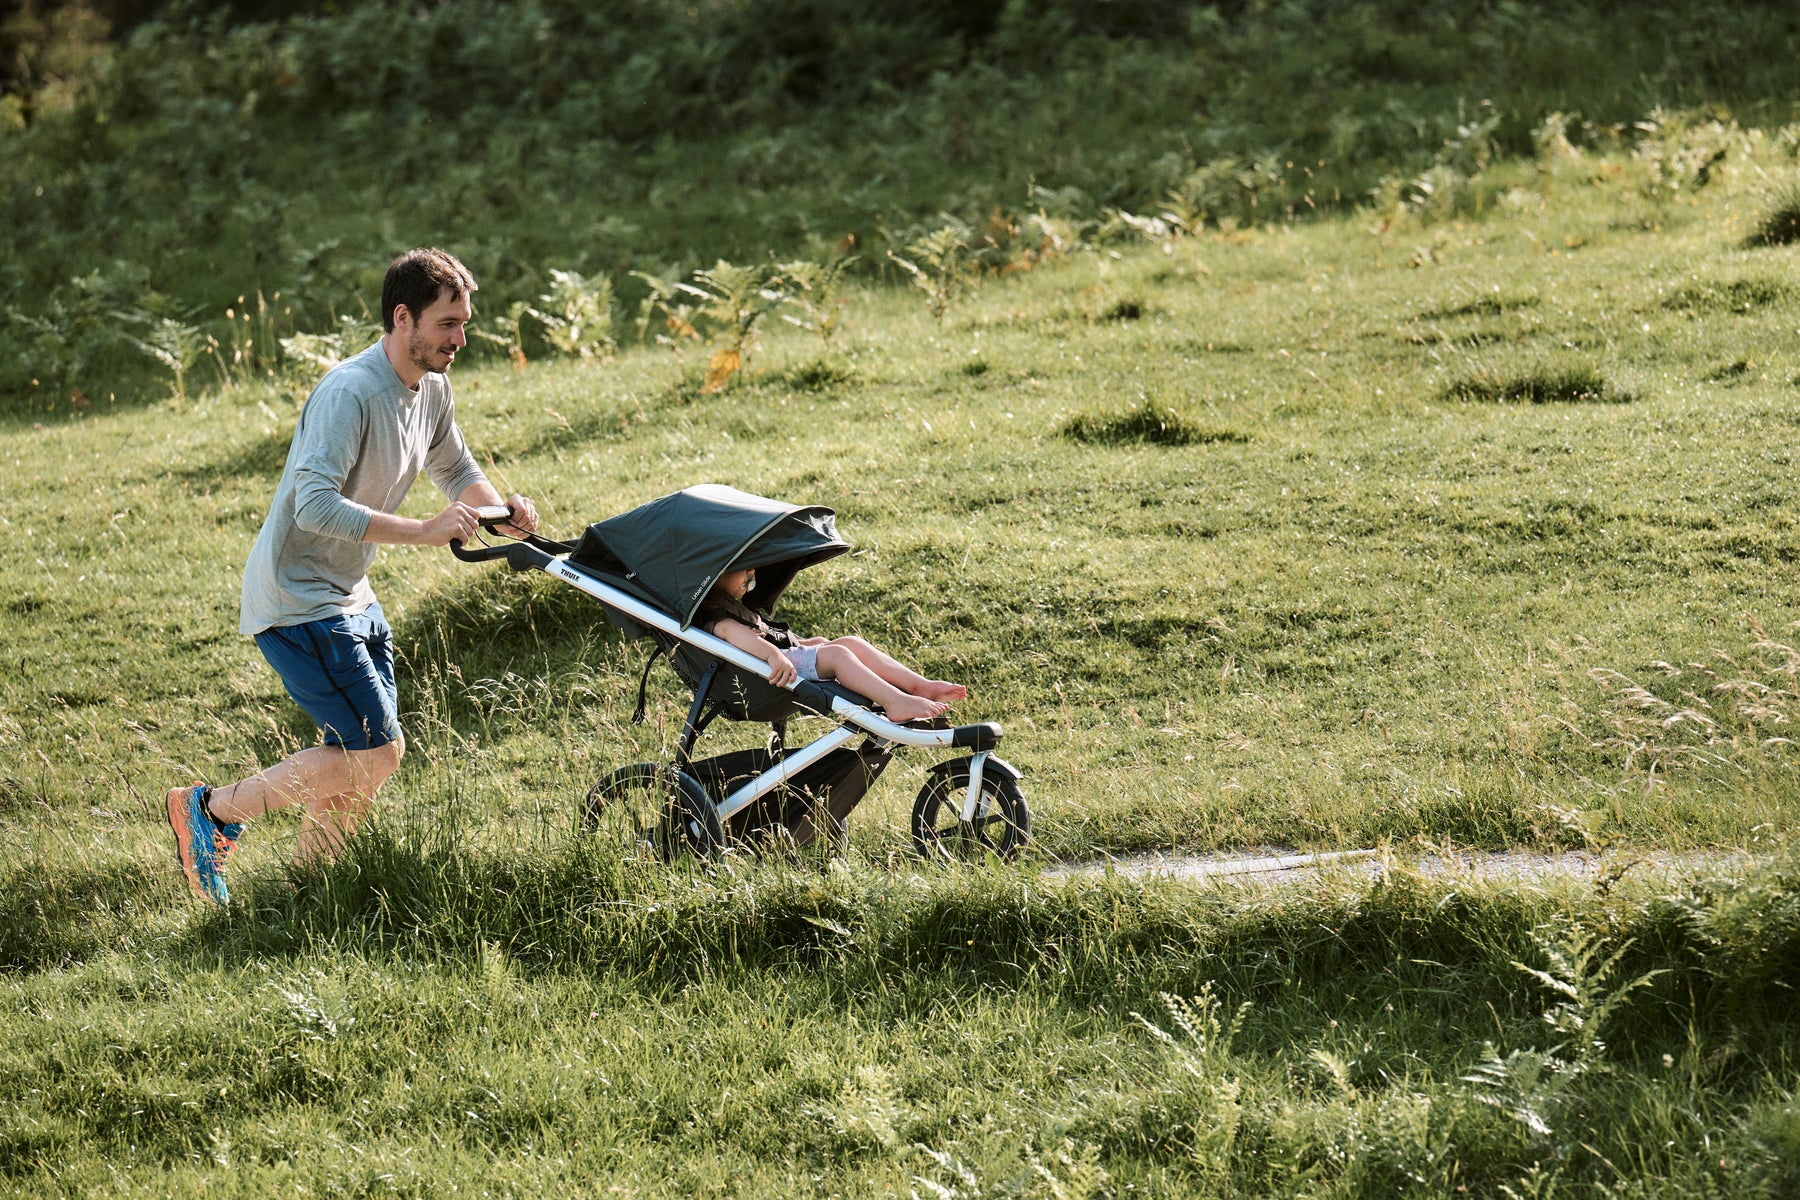 Dad running with child in jogging stroller